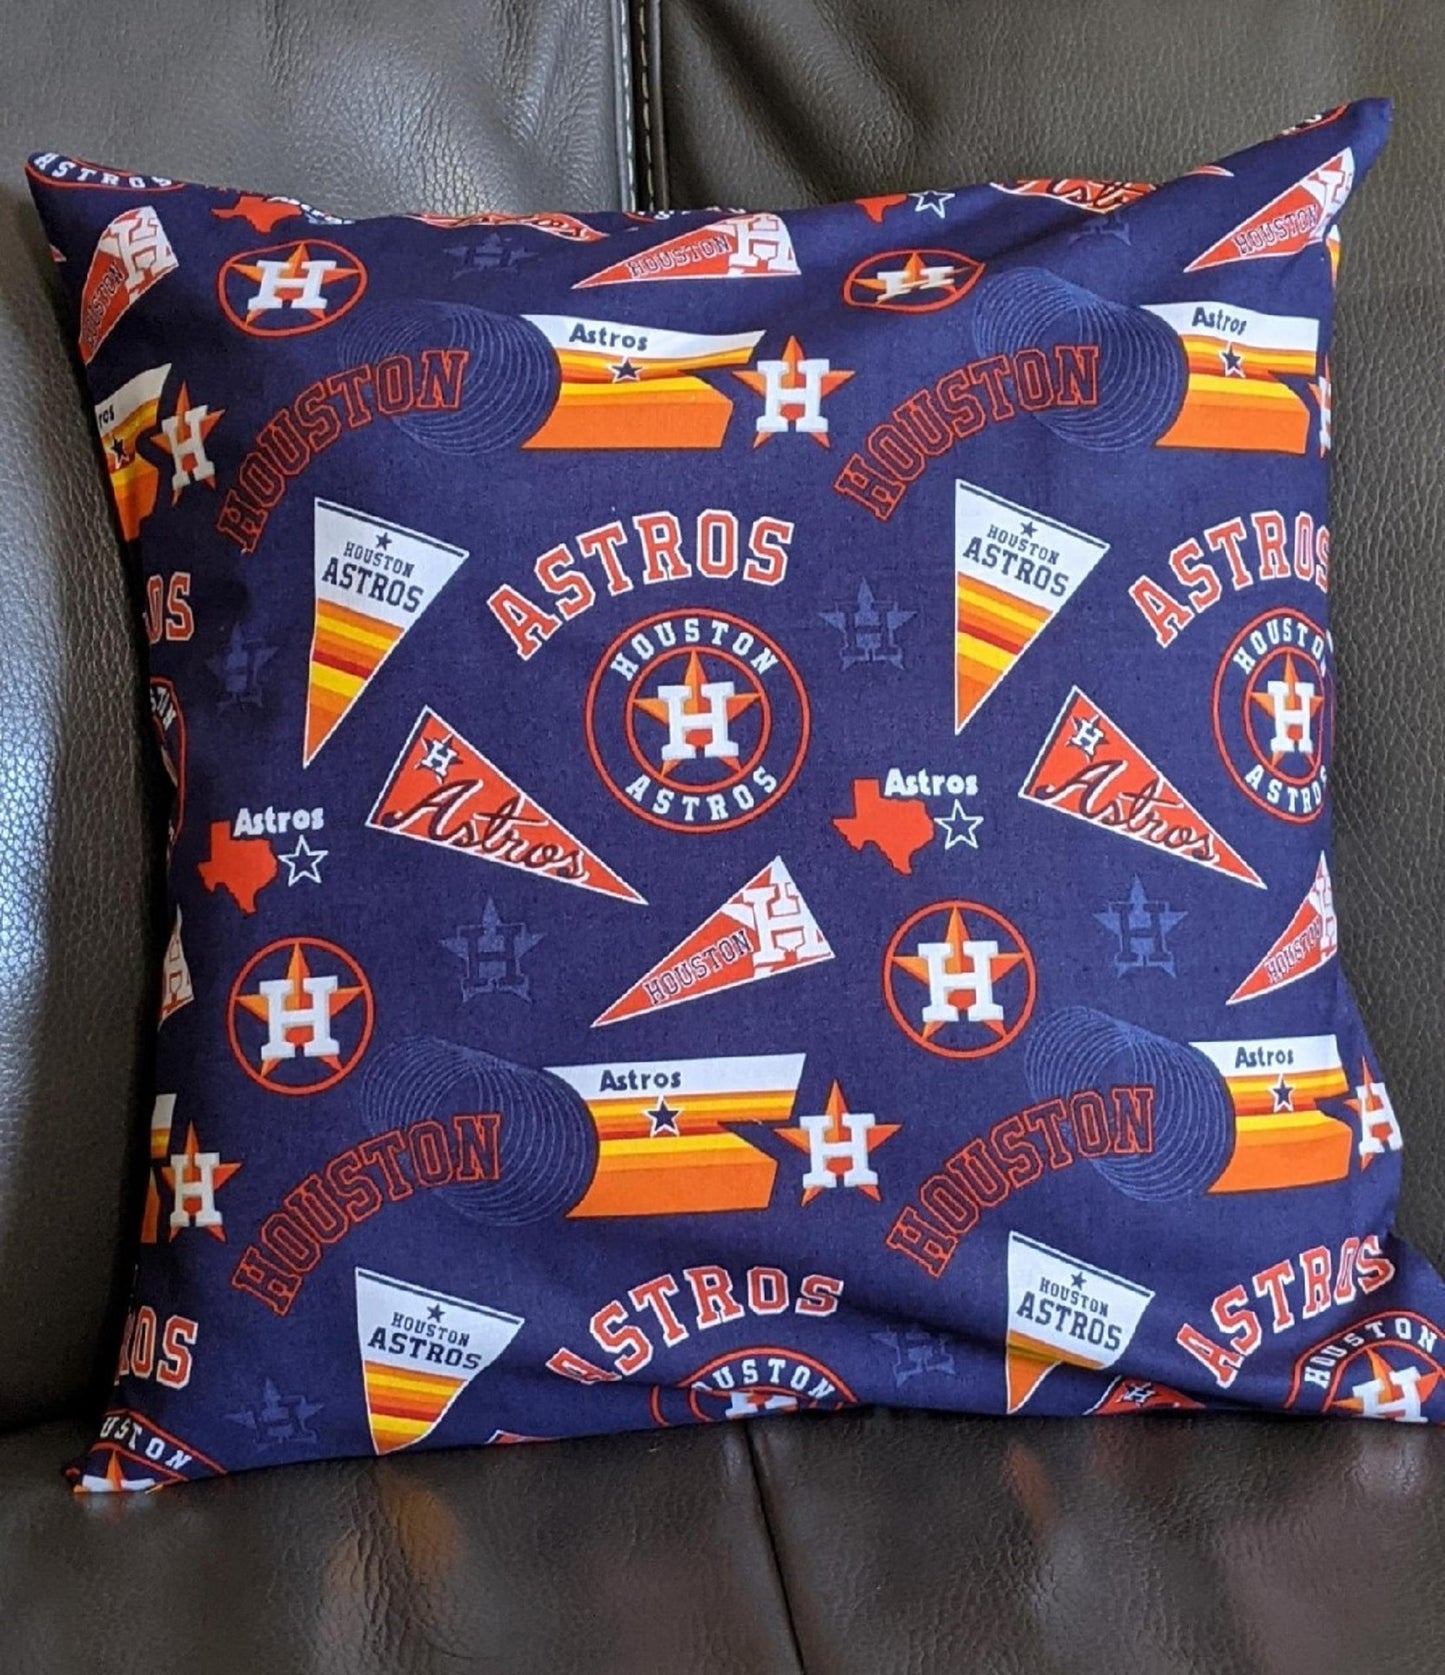 Decorator Pillow Cover-Astros Pennants-16" x 16" - Pillow Form Not Included